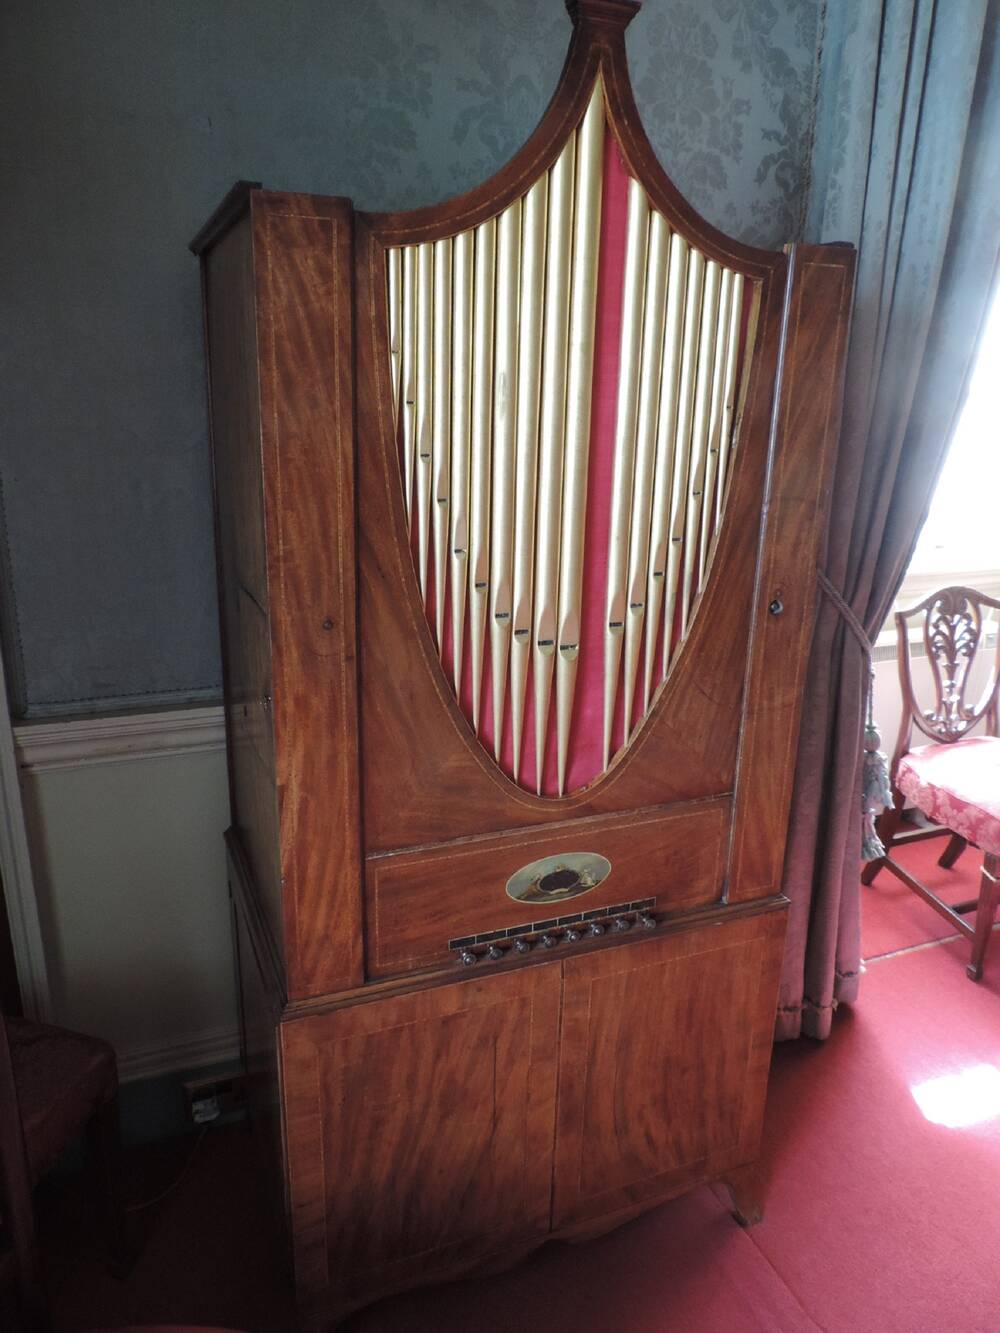 A barrel organ, housed in a tall wooden cabinet, stands by the wall, in front of blue curtains. There are silver pipes at the top of the cabinet, with a row of pegs halfway down. There are two cupboard doors at the bottom of the cabinet.